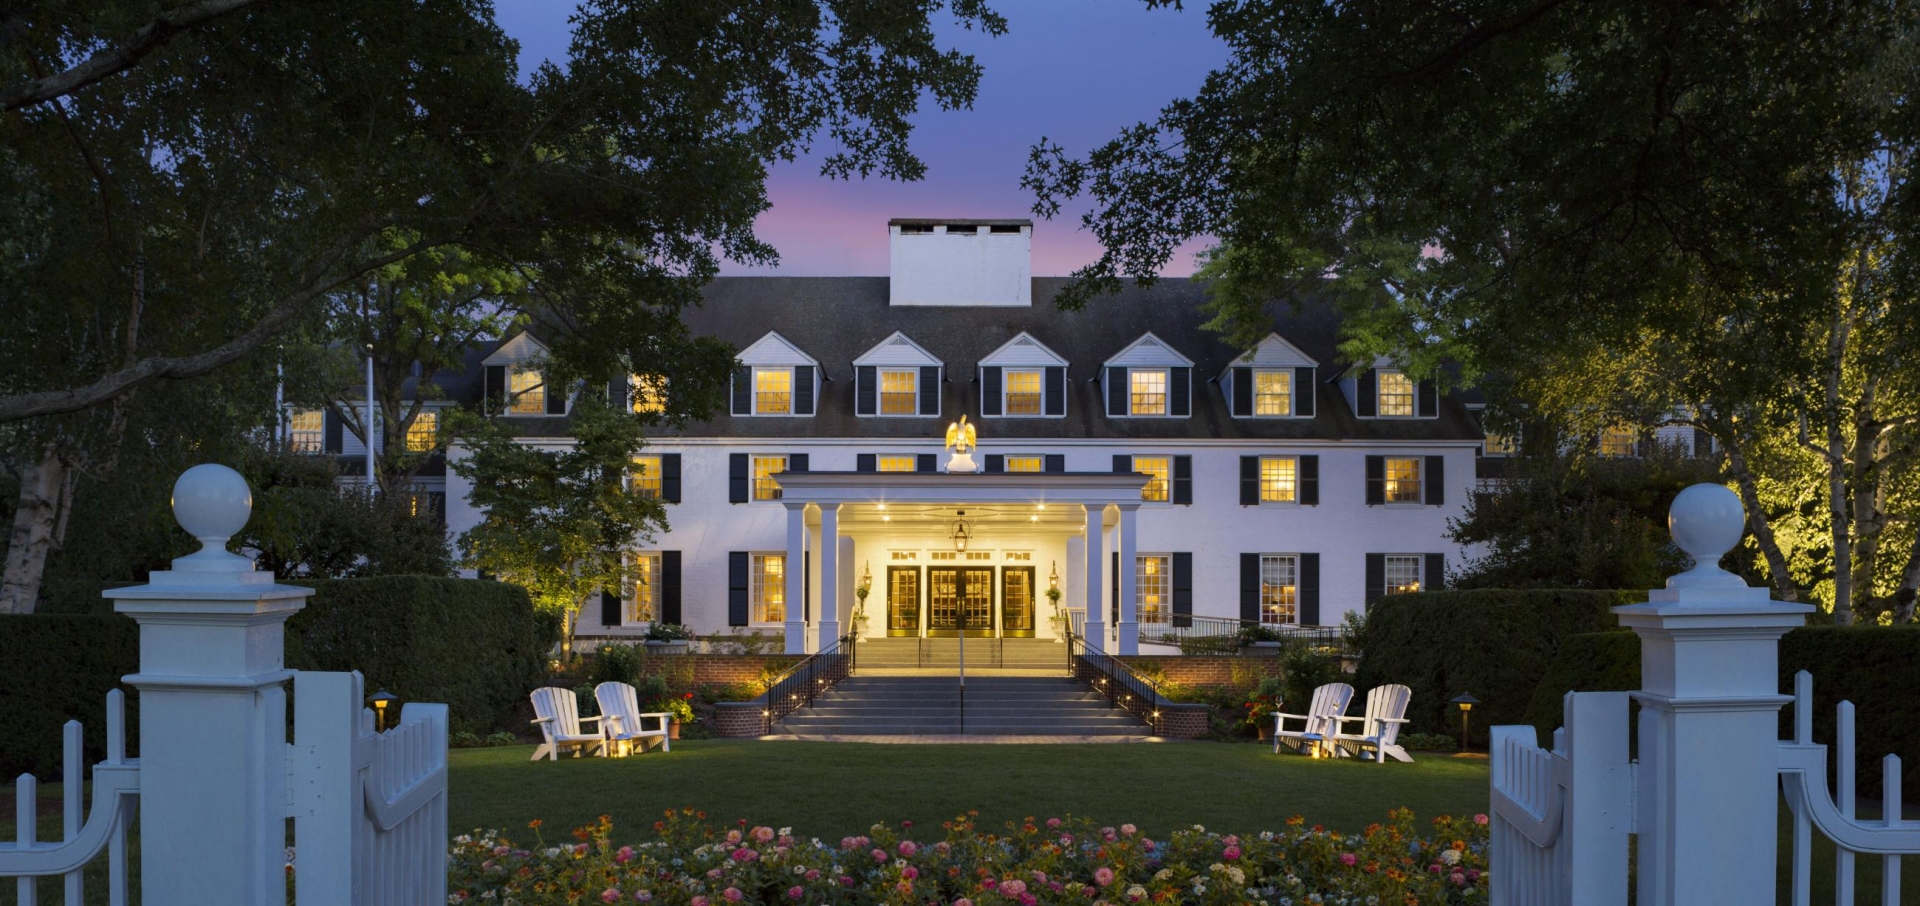 Top 10 Oldest Hotels in the US - The First Hotels